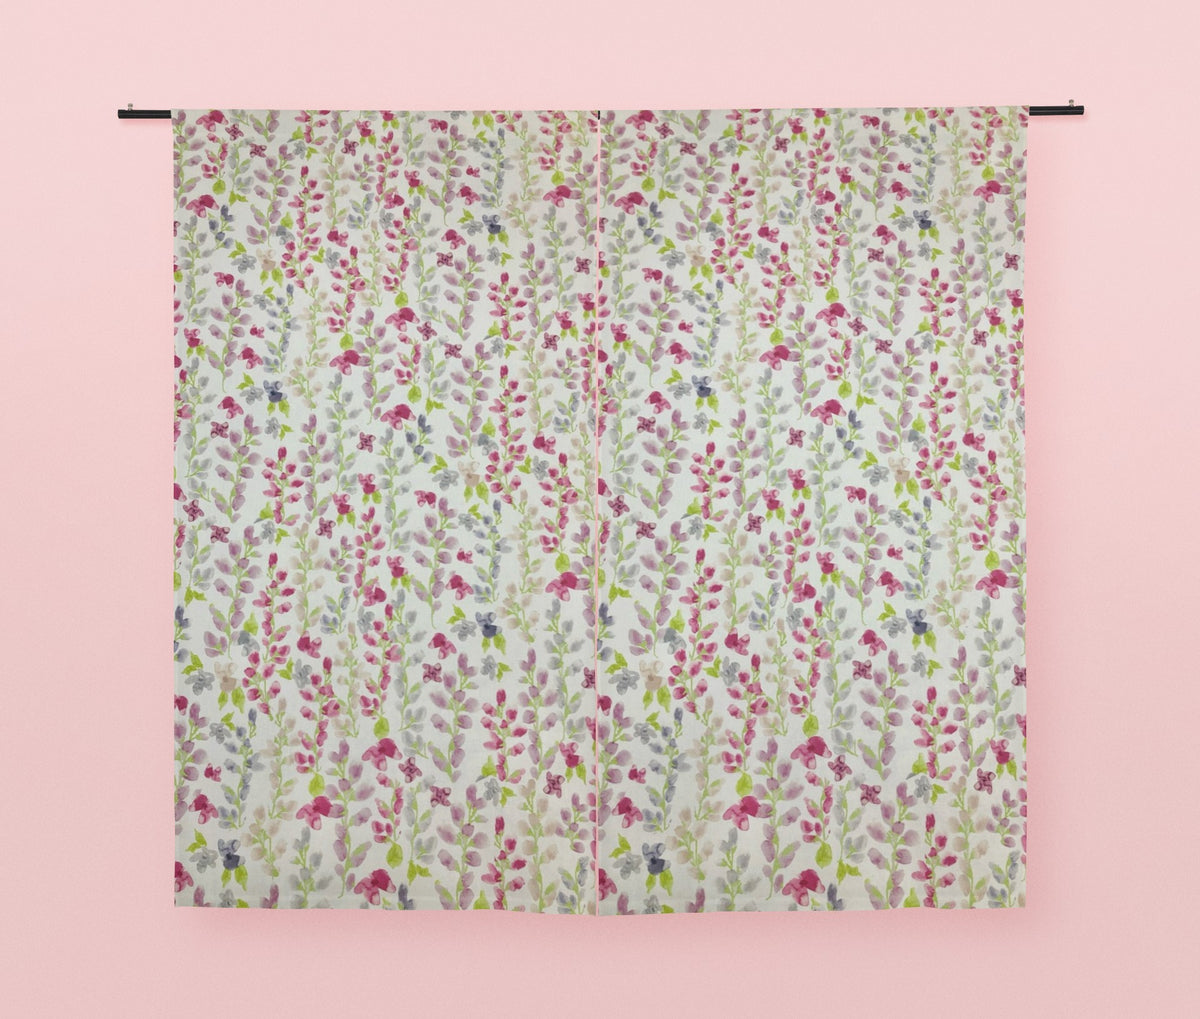 Watercolour Pink, Grey, Green Floral on Ivory Panama Fabric